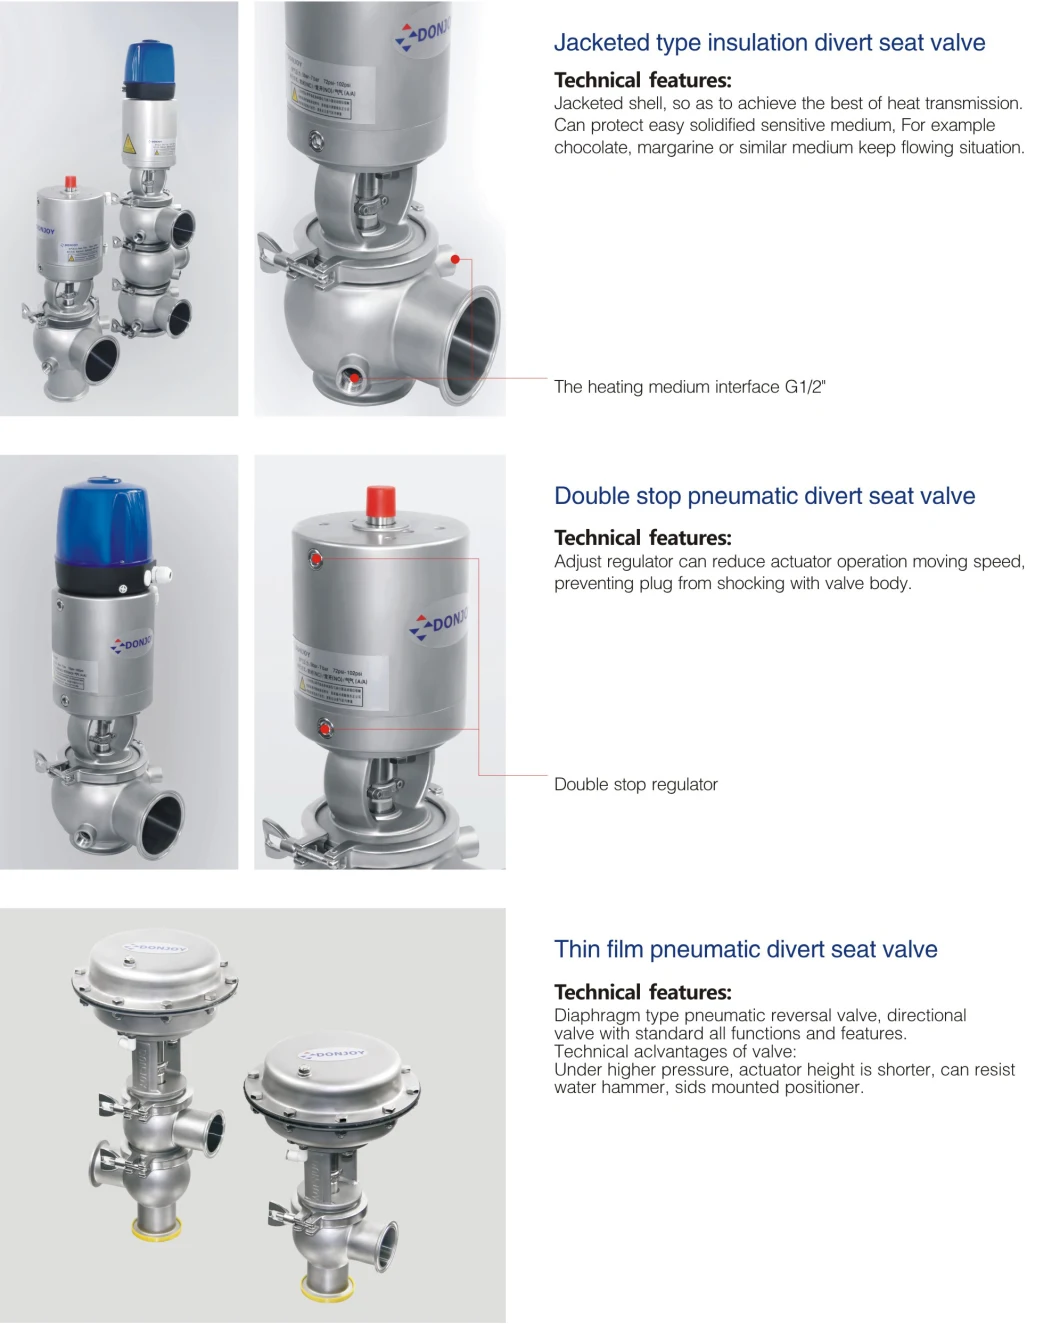 Stainless Steel Divert Seat Valve with Pneumatic Actuator